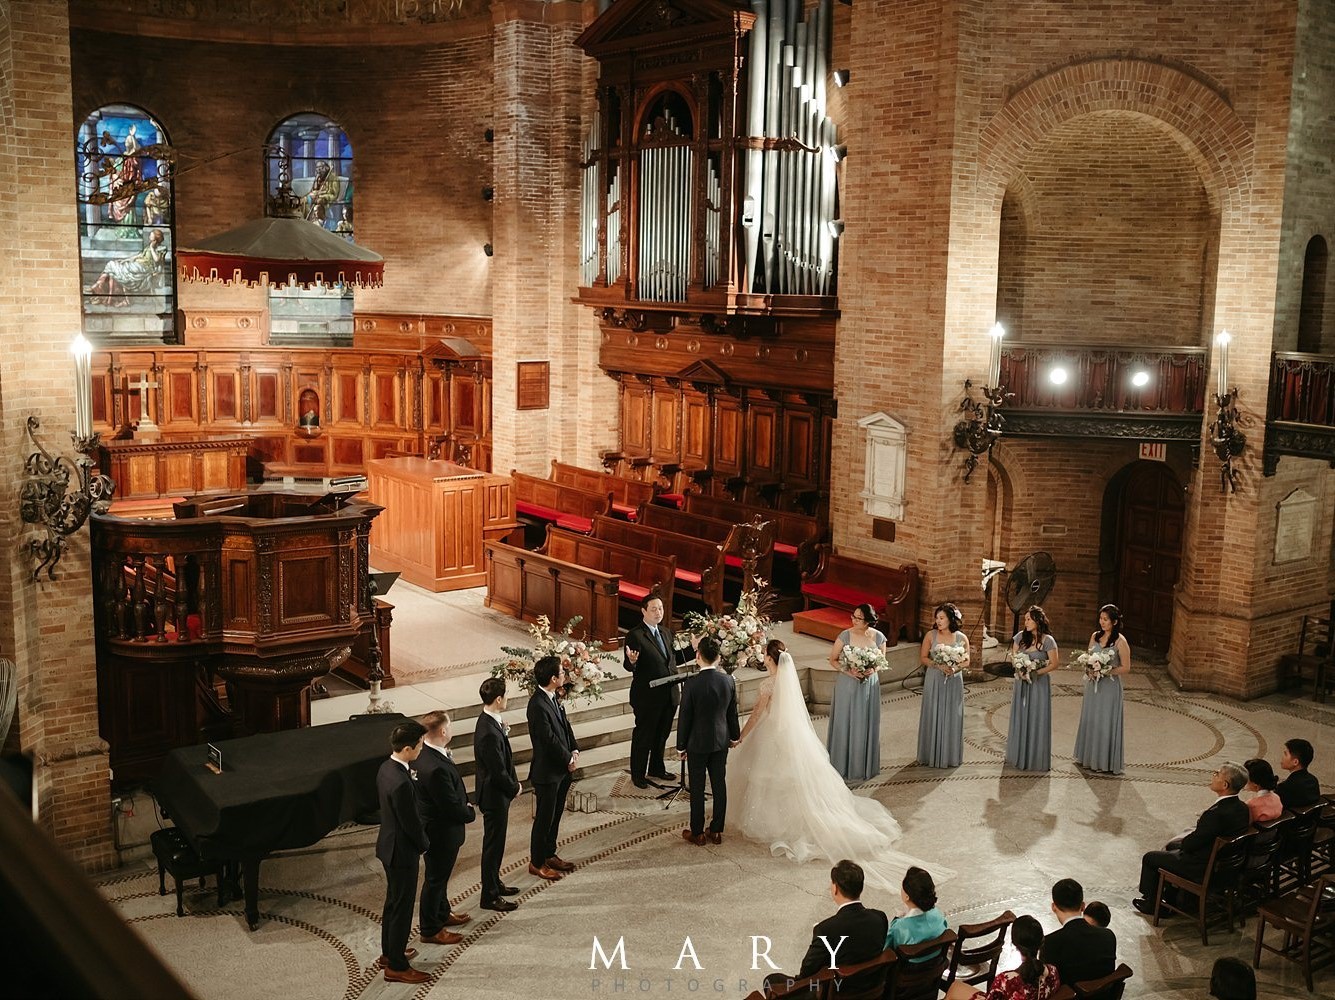 A couple surrounded on both sides by their groomsmen and bridesmaids as they are wed at Saint Paul's Chapel.